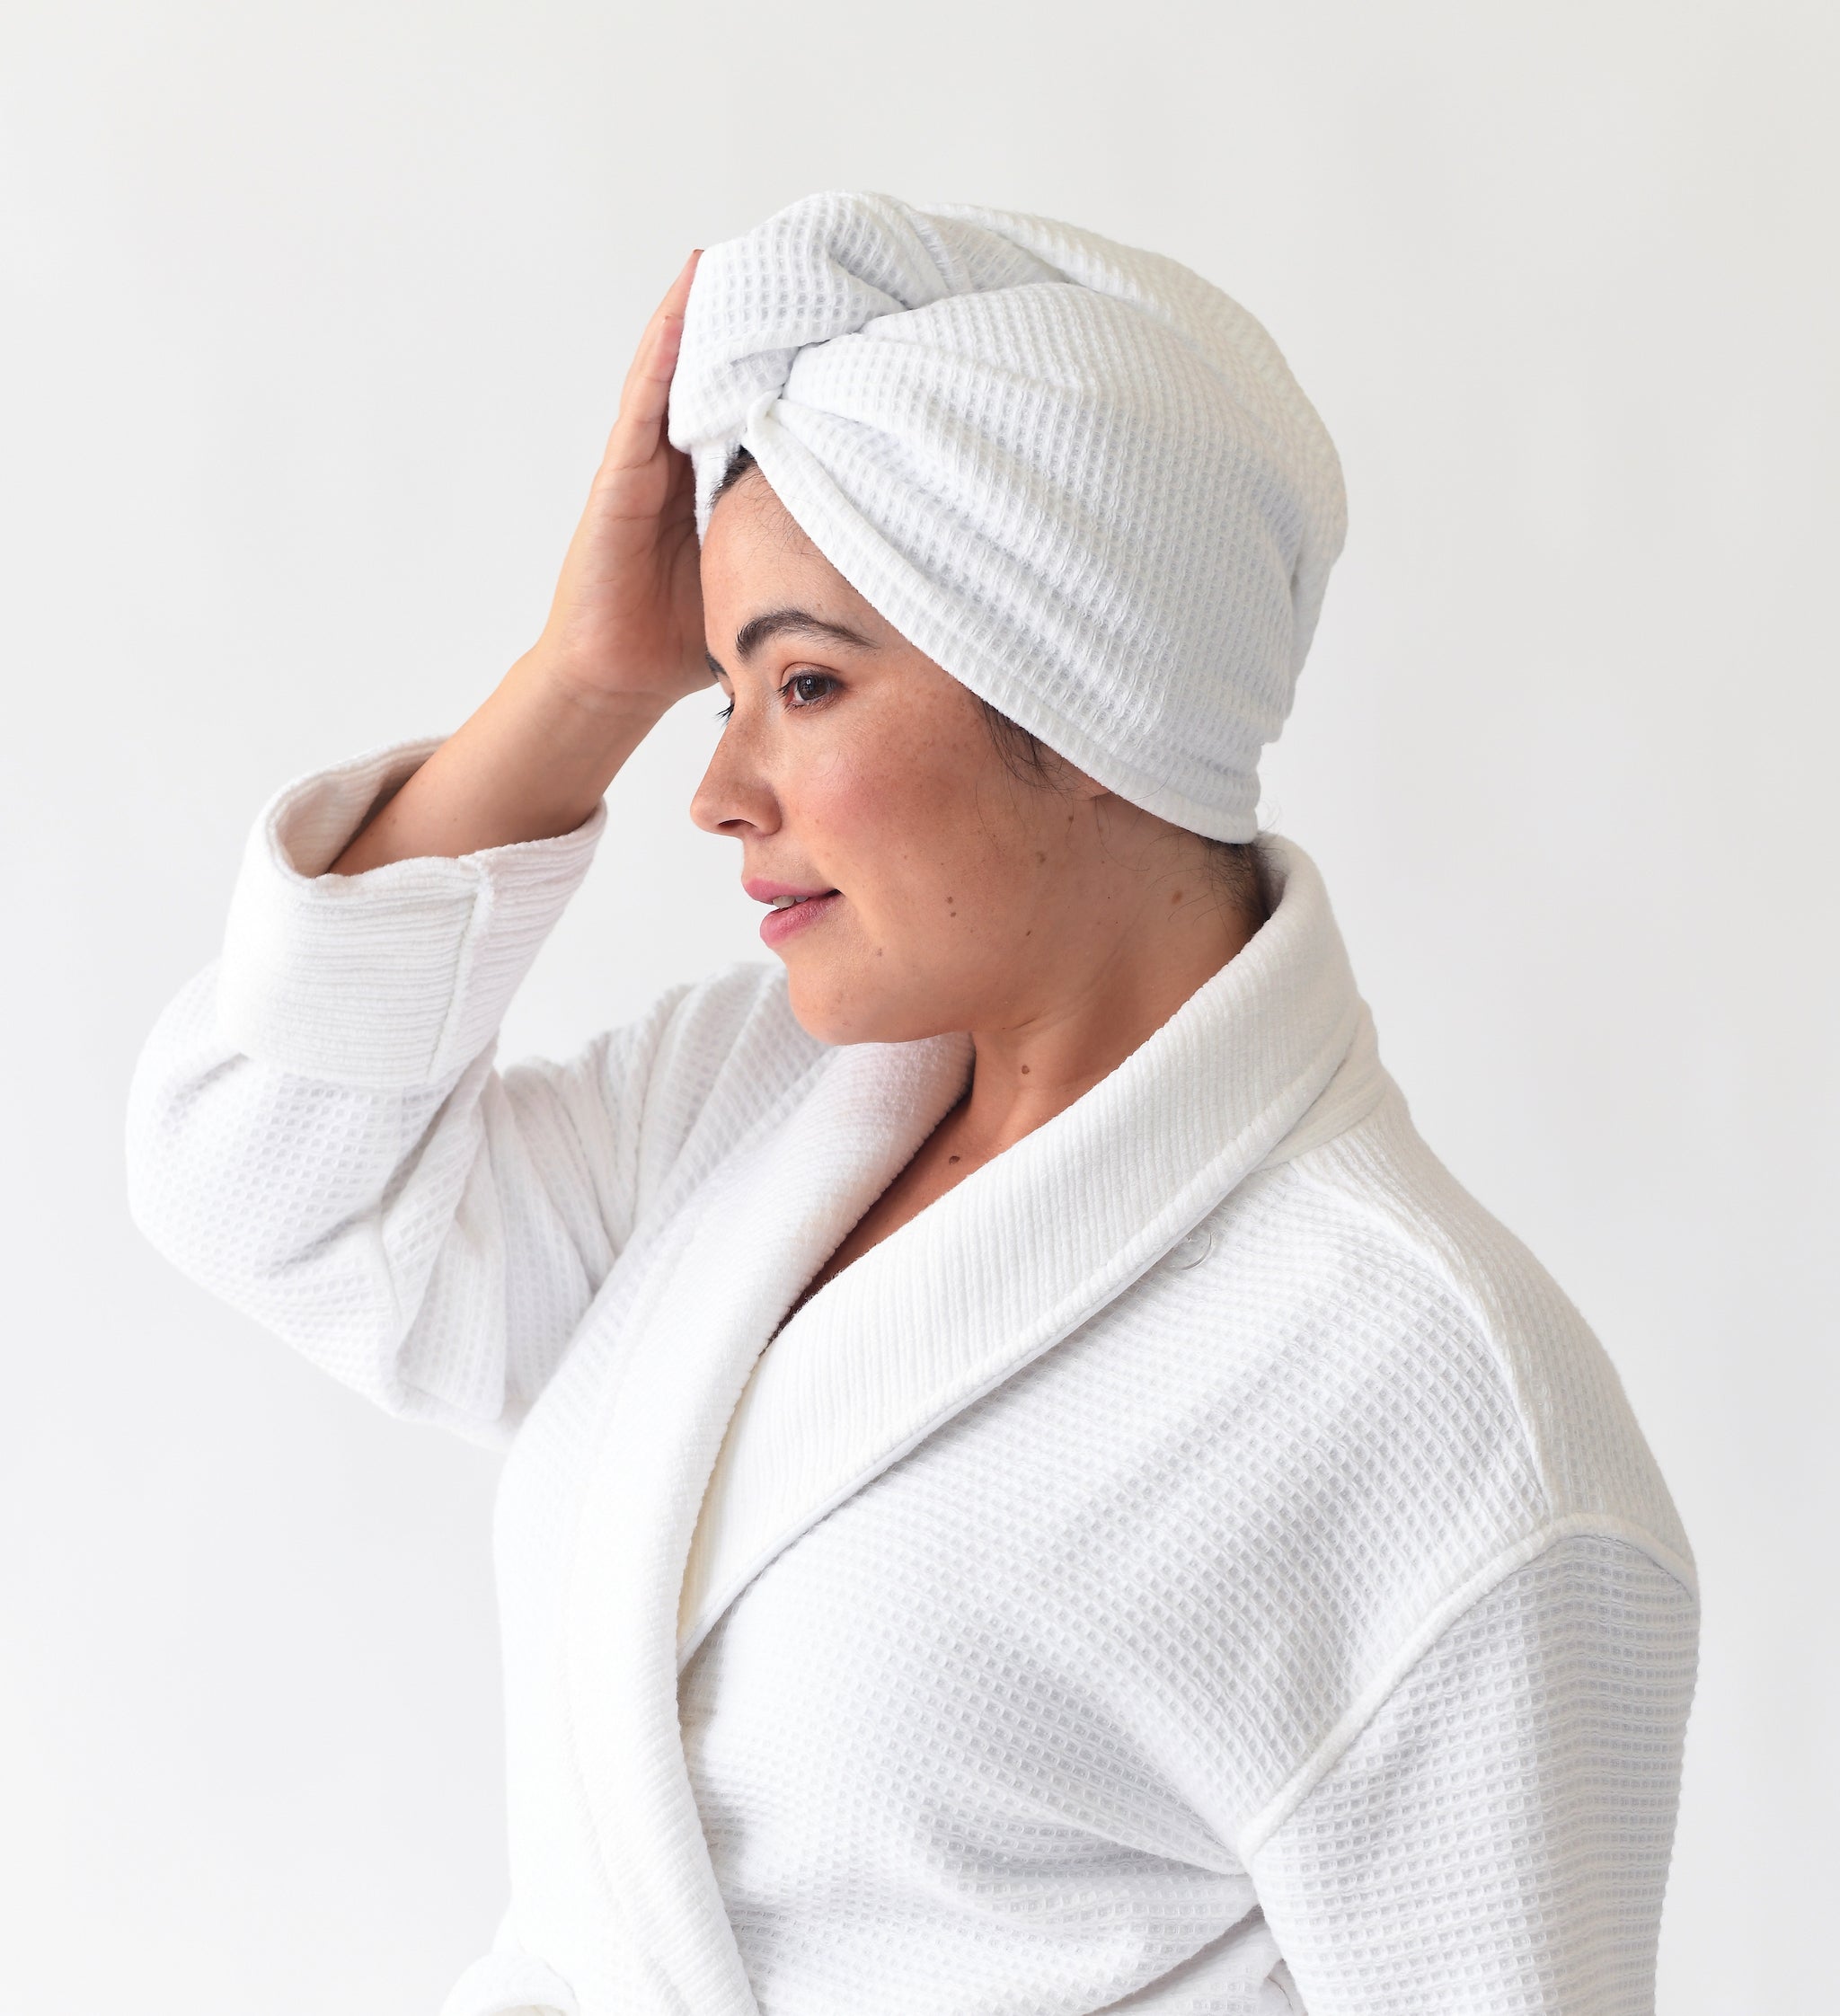 White Waffle Hair Towel. The hair towel is shown being worn by a woman. The photo was taken with a white background |Color:White